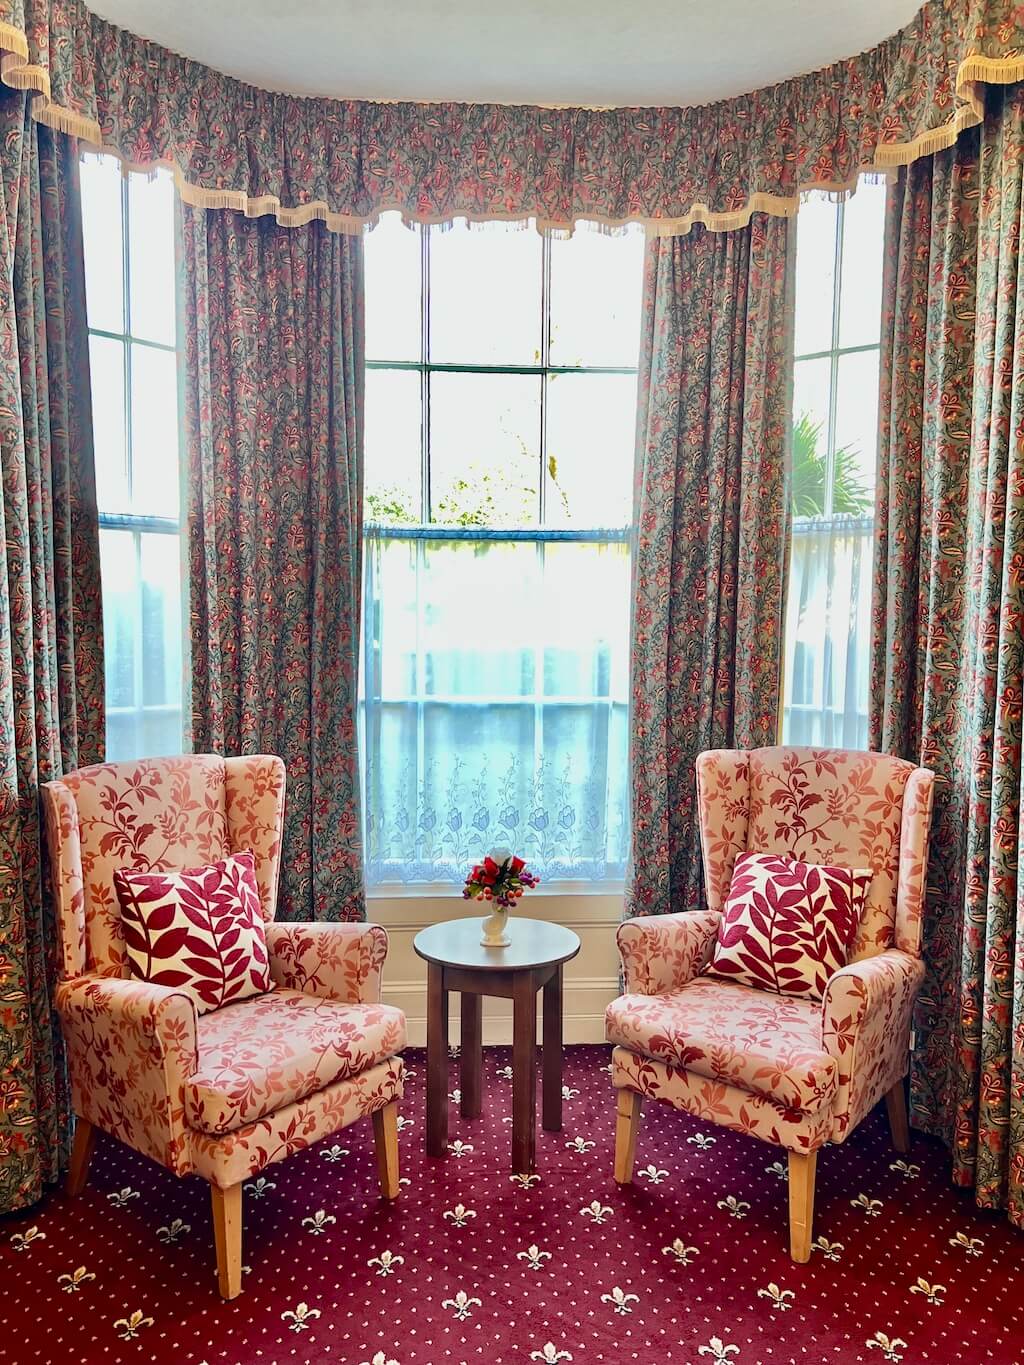 Chairs in front of the window